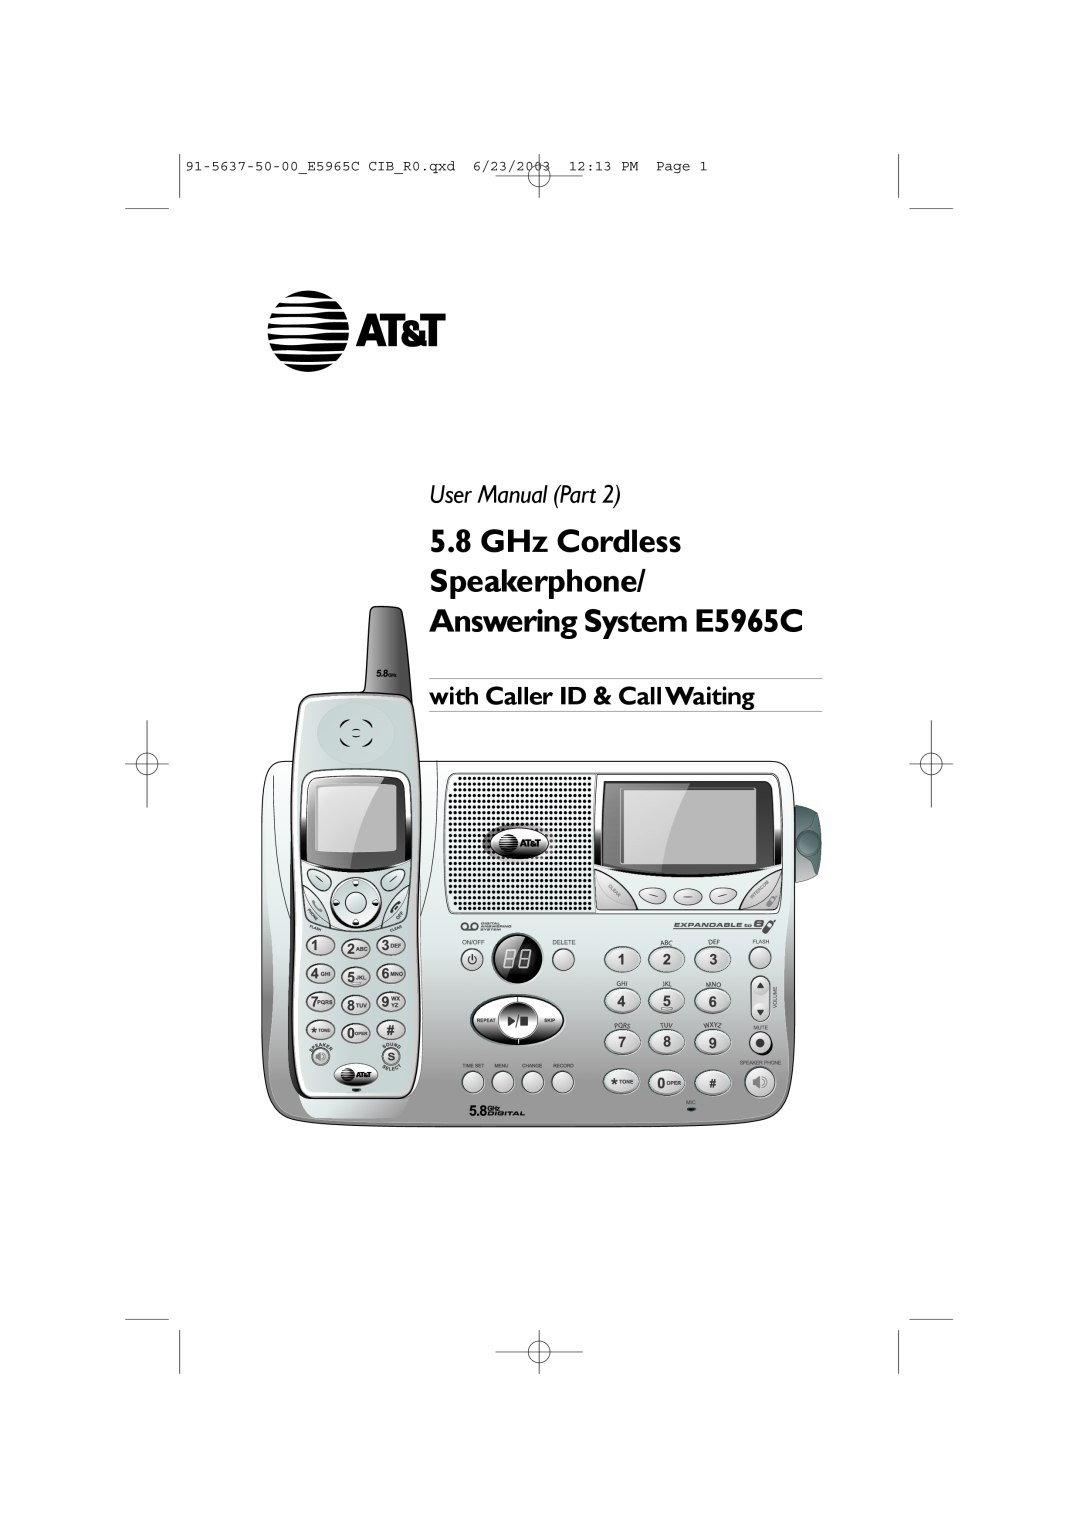 AT&T user manual User Manual Part, with Caller ID & CallWaiting, GHz Cordless Speakerphone/ Answering System E5965C 